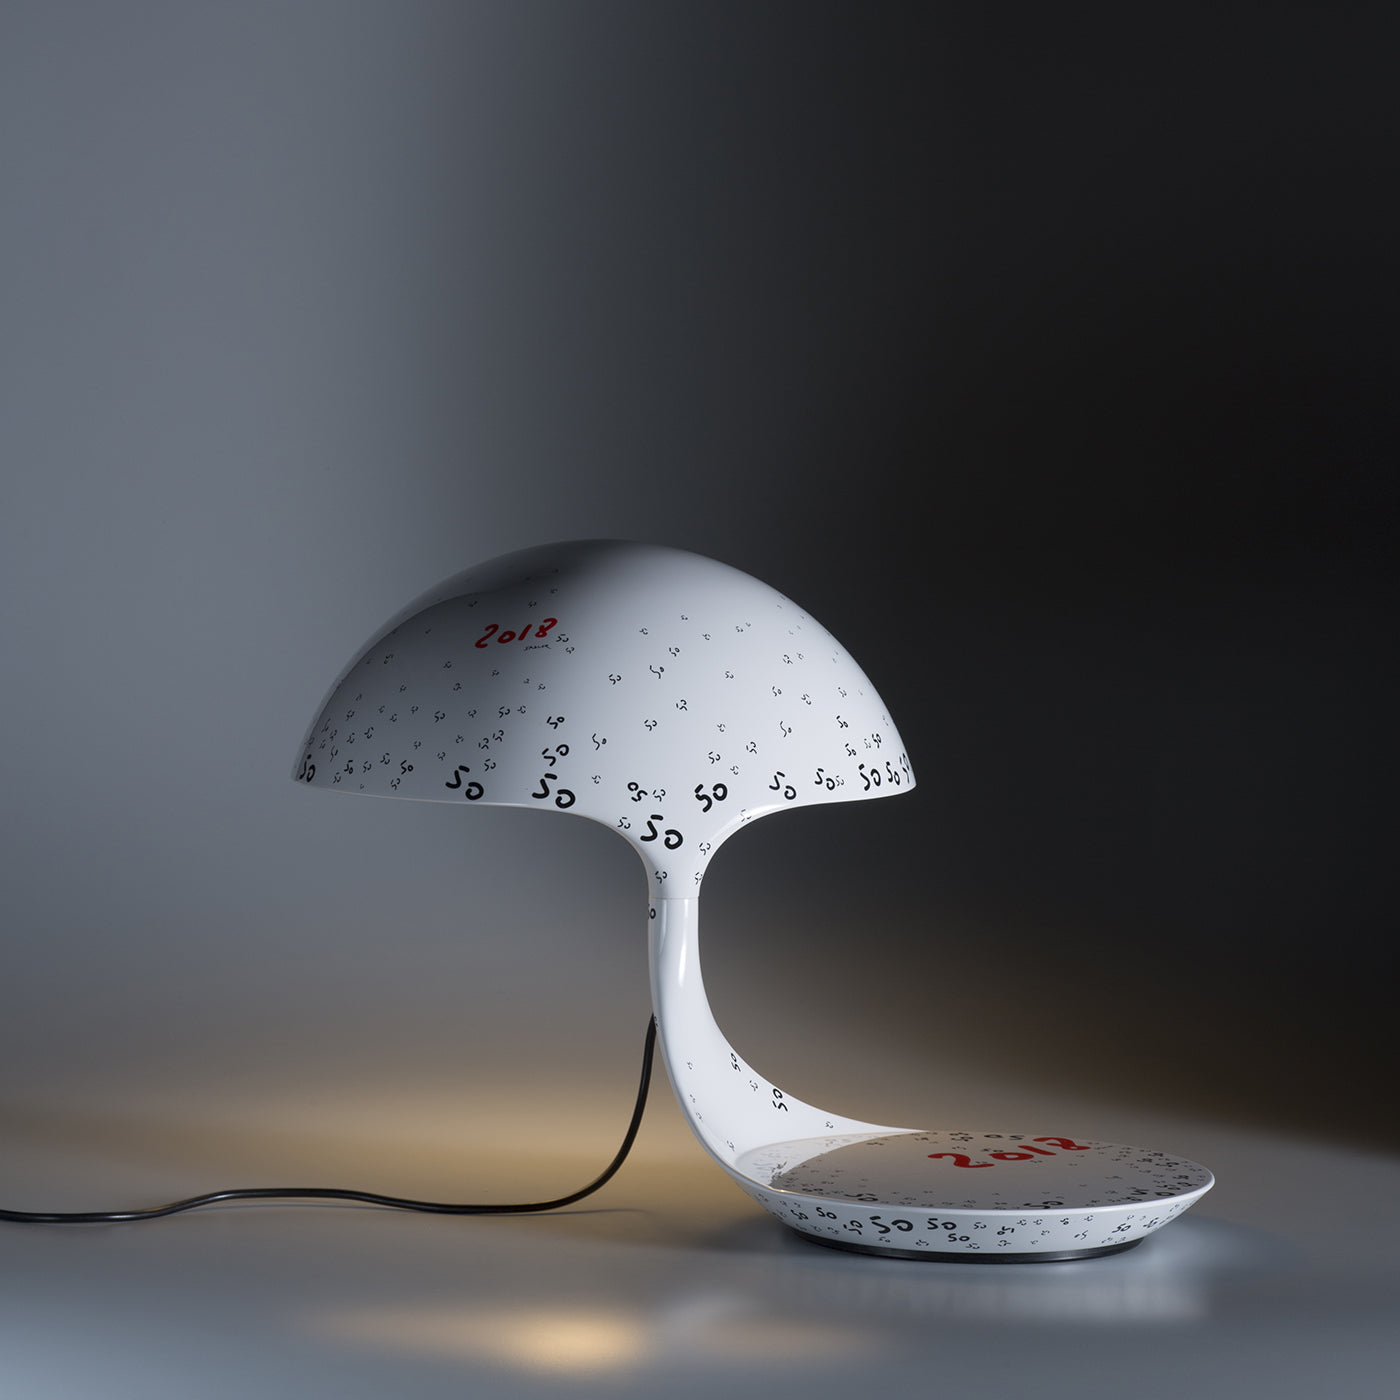 Cobra Texture 50-Patterned Table Lamp by Marc Sadler - Alternative view 1